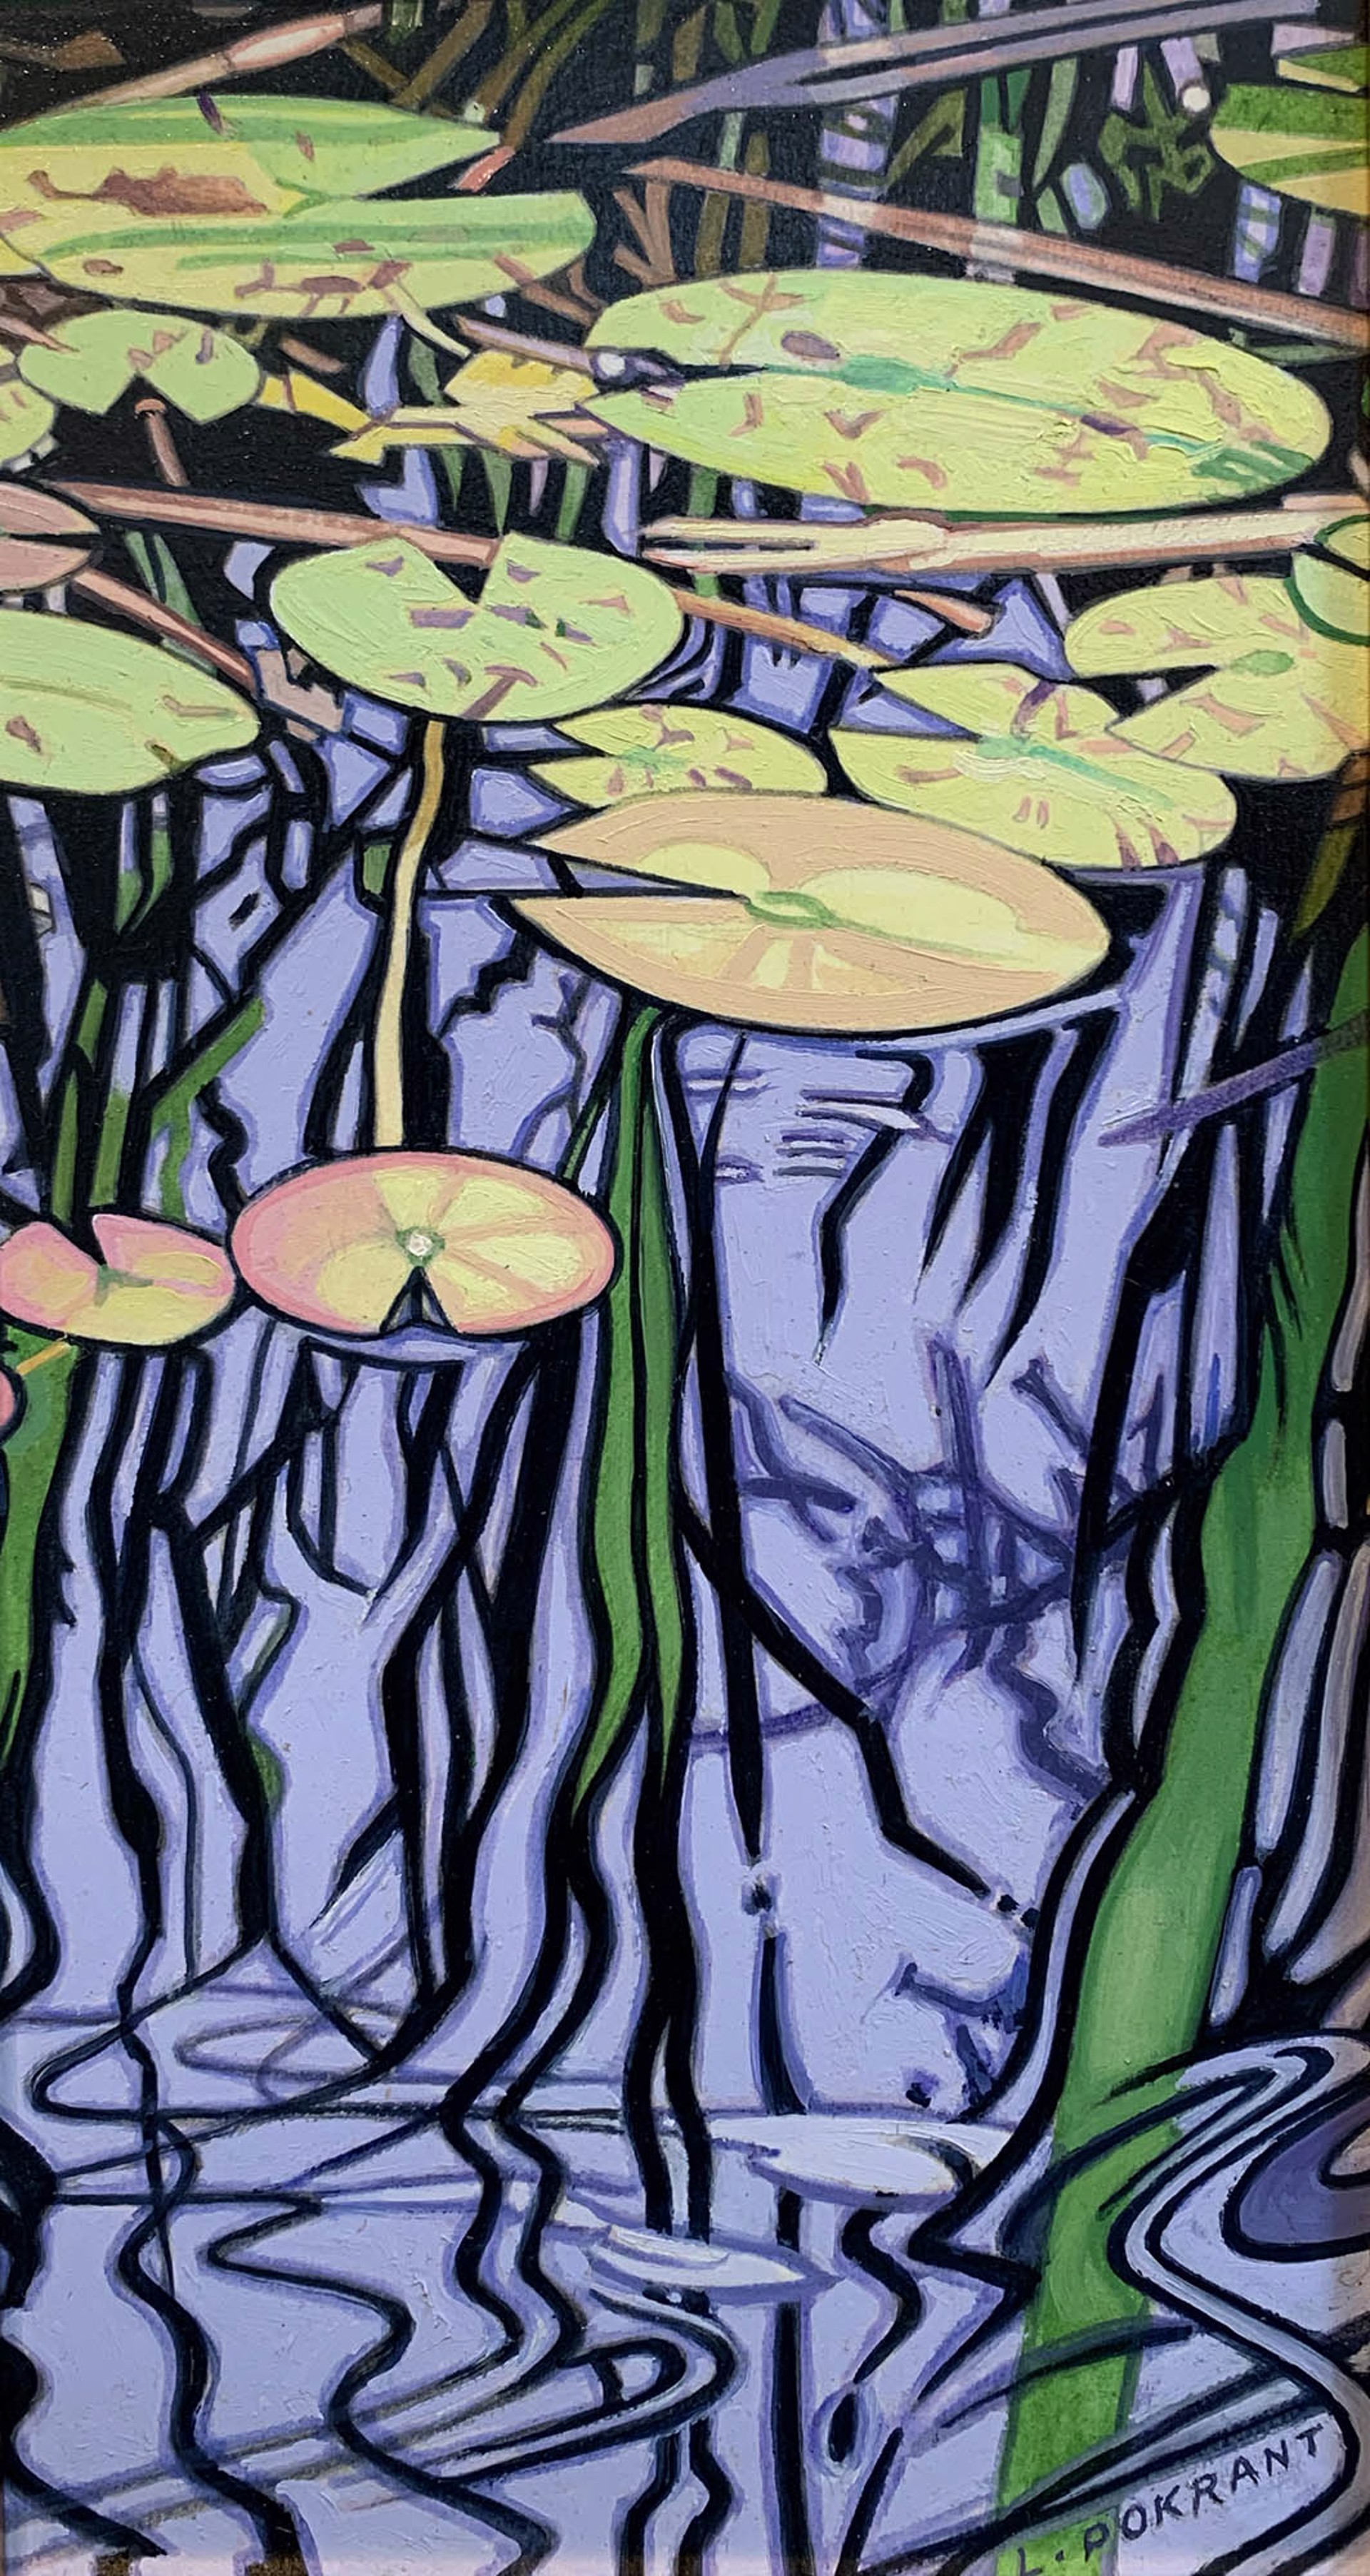 Lily Pond #2 by Luther Pokrant